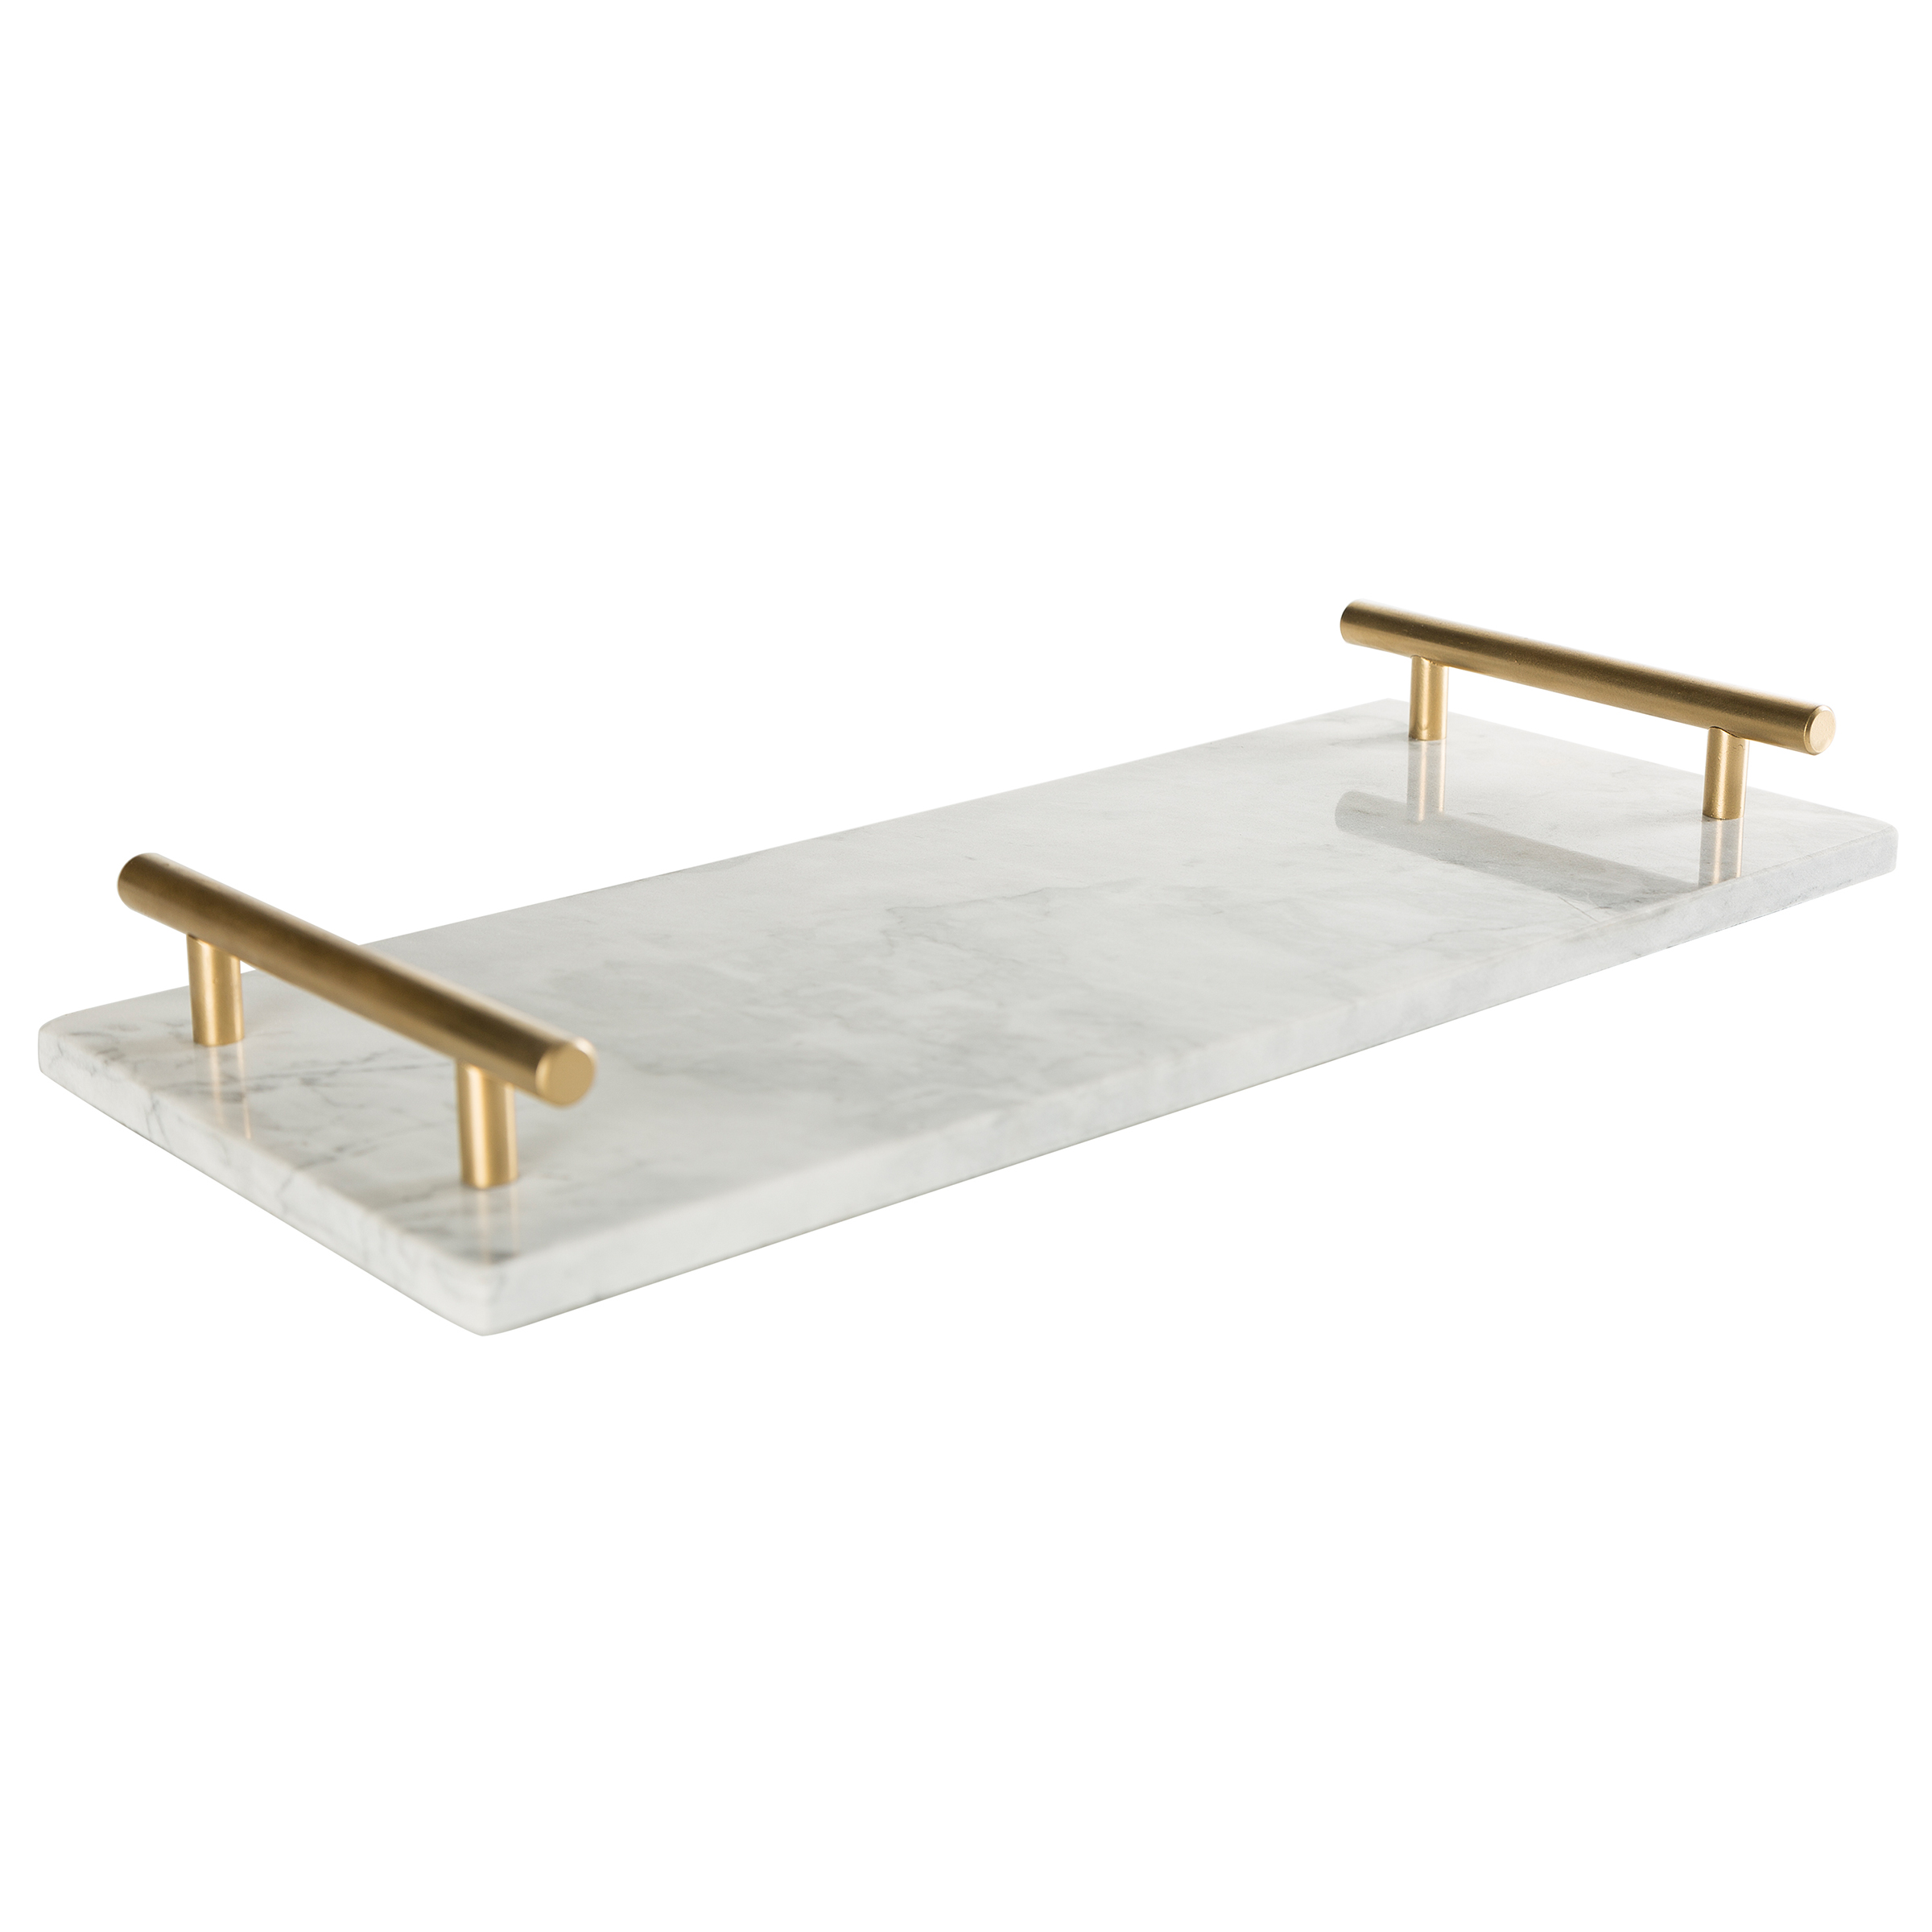 Better Homes&gardens Bhg Marble Tray - image 3 of 3